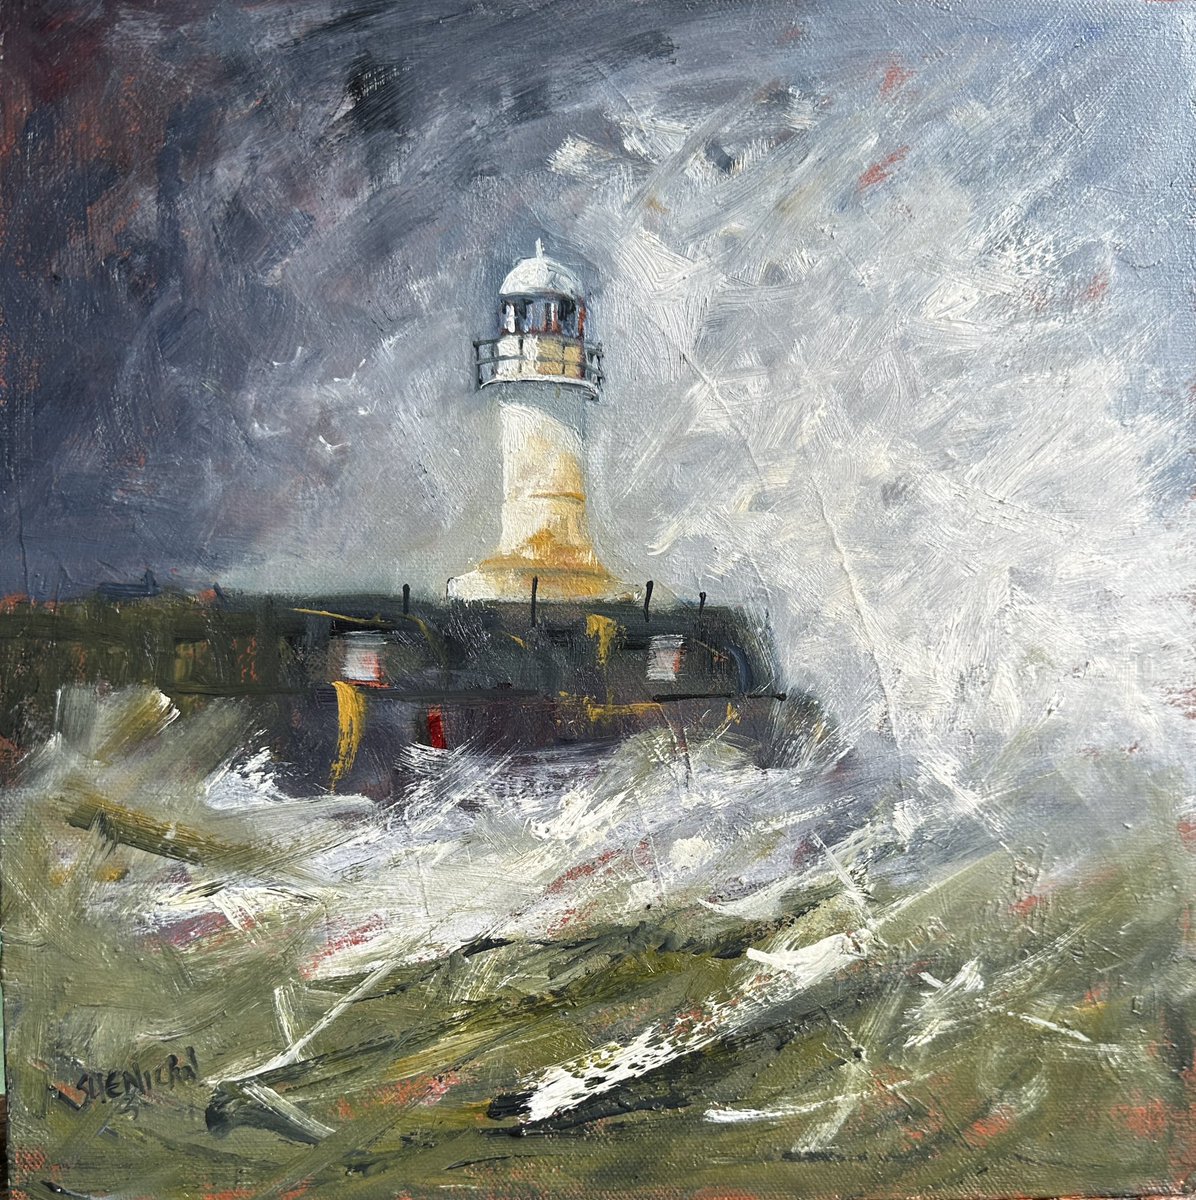 I don’t want to overwork this one, I like the fresh spontaneity of it. #SouthGare #lighthouse #Tees #storm #oils 12x12” #marineart